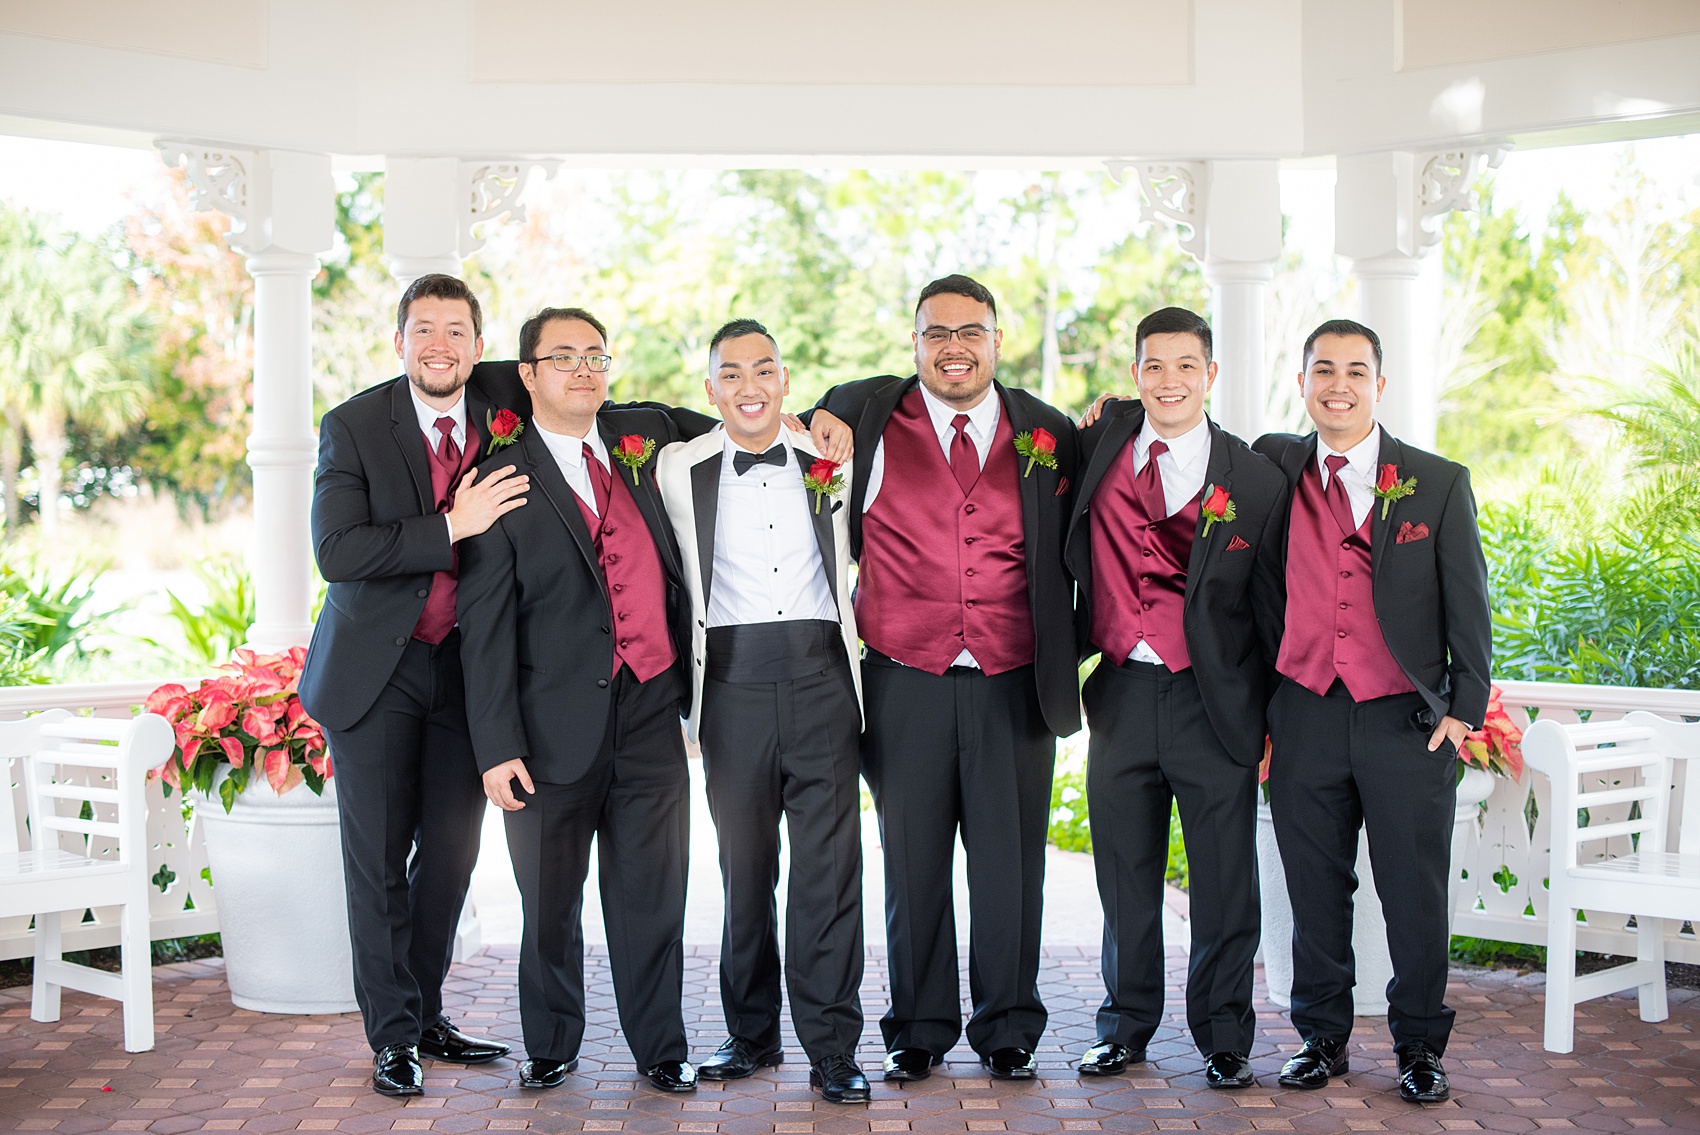 Photographs of a Walt Disney World bridal party by Mikkel Paige Photography. The groom wore a white tuxedo to his wedding venues of the Grand Floridian, Wedding Pavilion and The Contemporary Resort. They all wore rose boutonnieres and marvel comic cufflinks, a small detail that was an awesome way to incorporate a fun idea. #disneywedding #disneybride #waltdisneyworld #DisneyWorldWedding #BeautyandtheBeast #redrosewedding